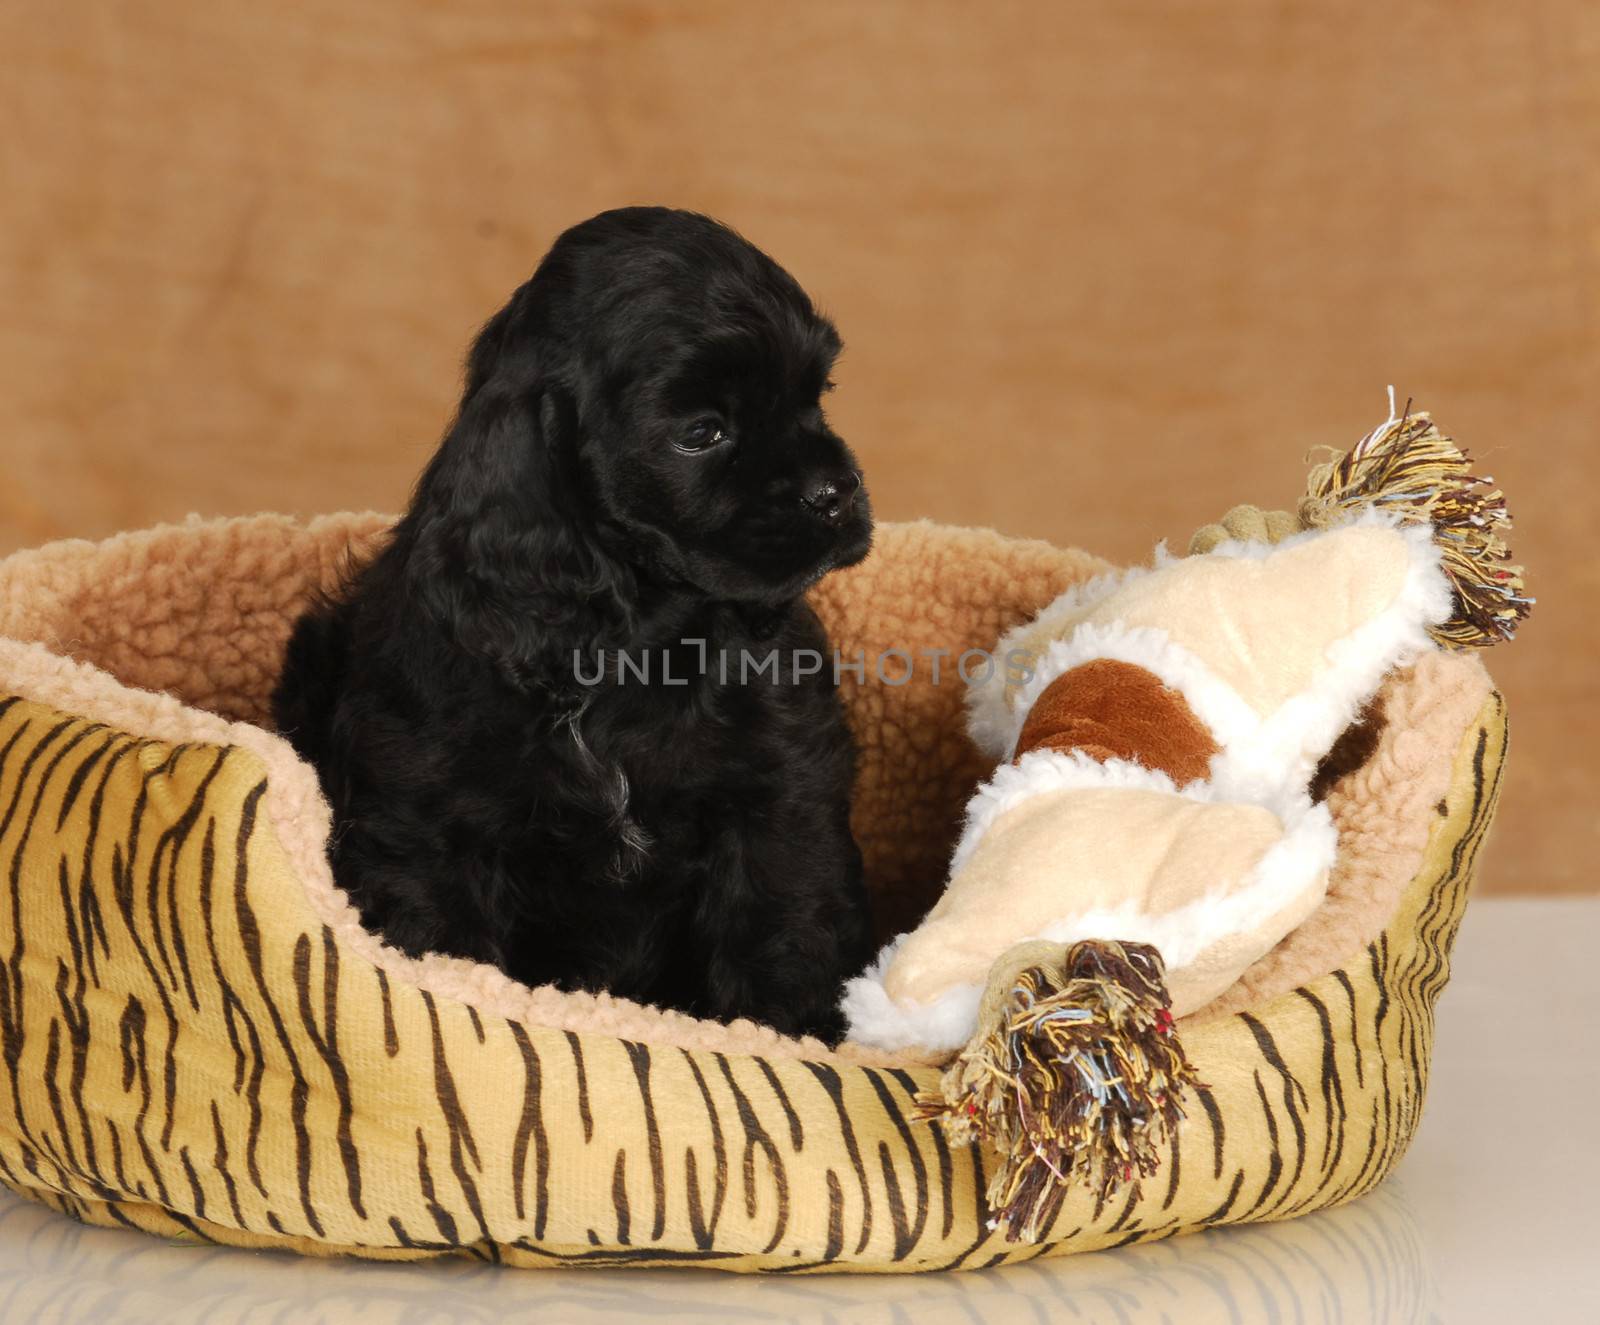 puppy in dog bed - seven week old American cocker spaniel puppy 